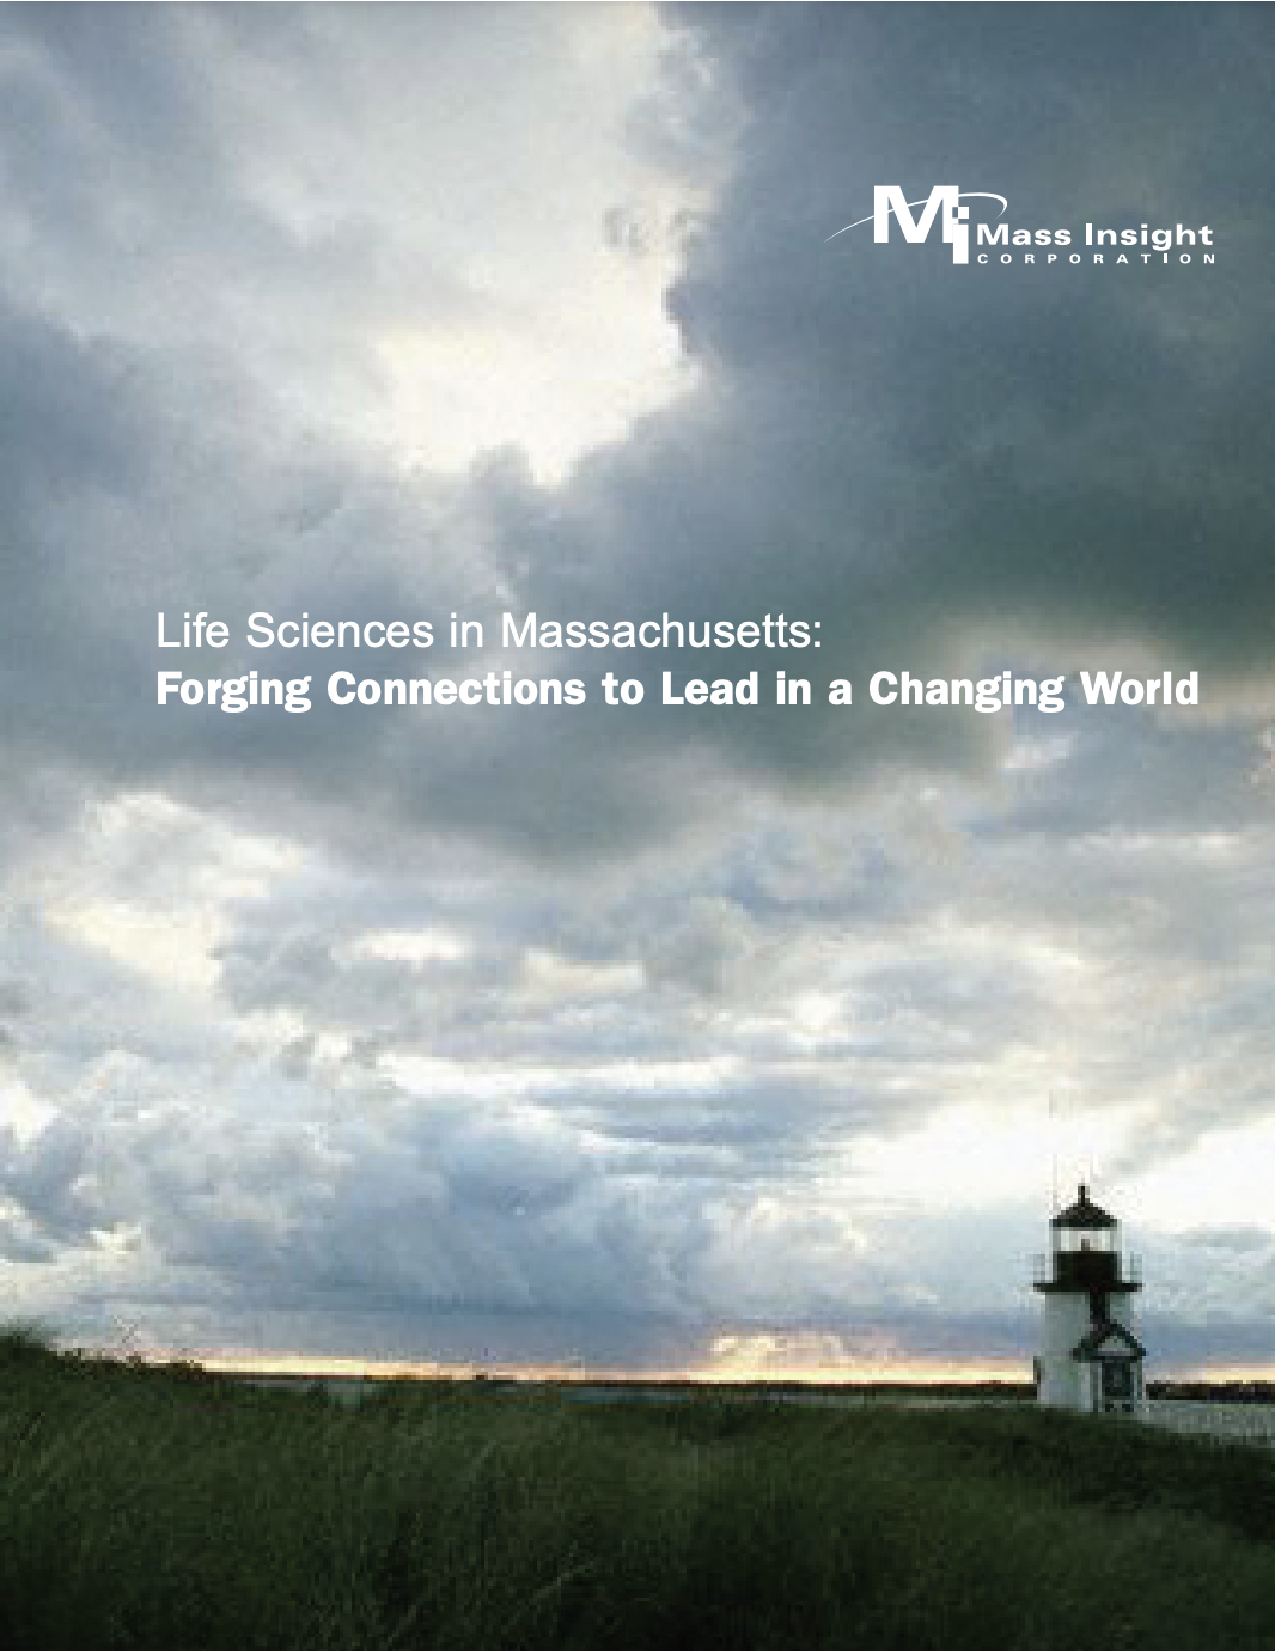 Life Sciences in Massachusetts: Forging Connections to Lead in a Changing World